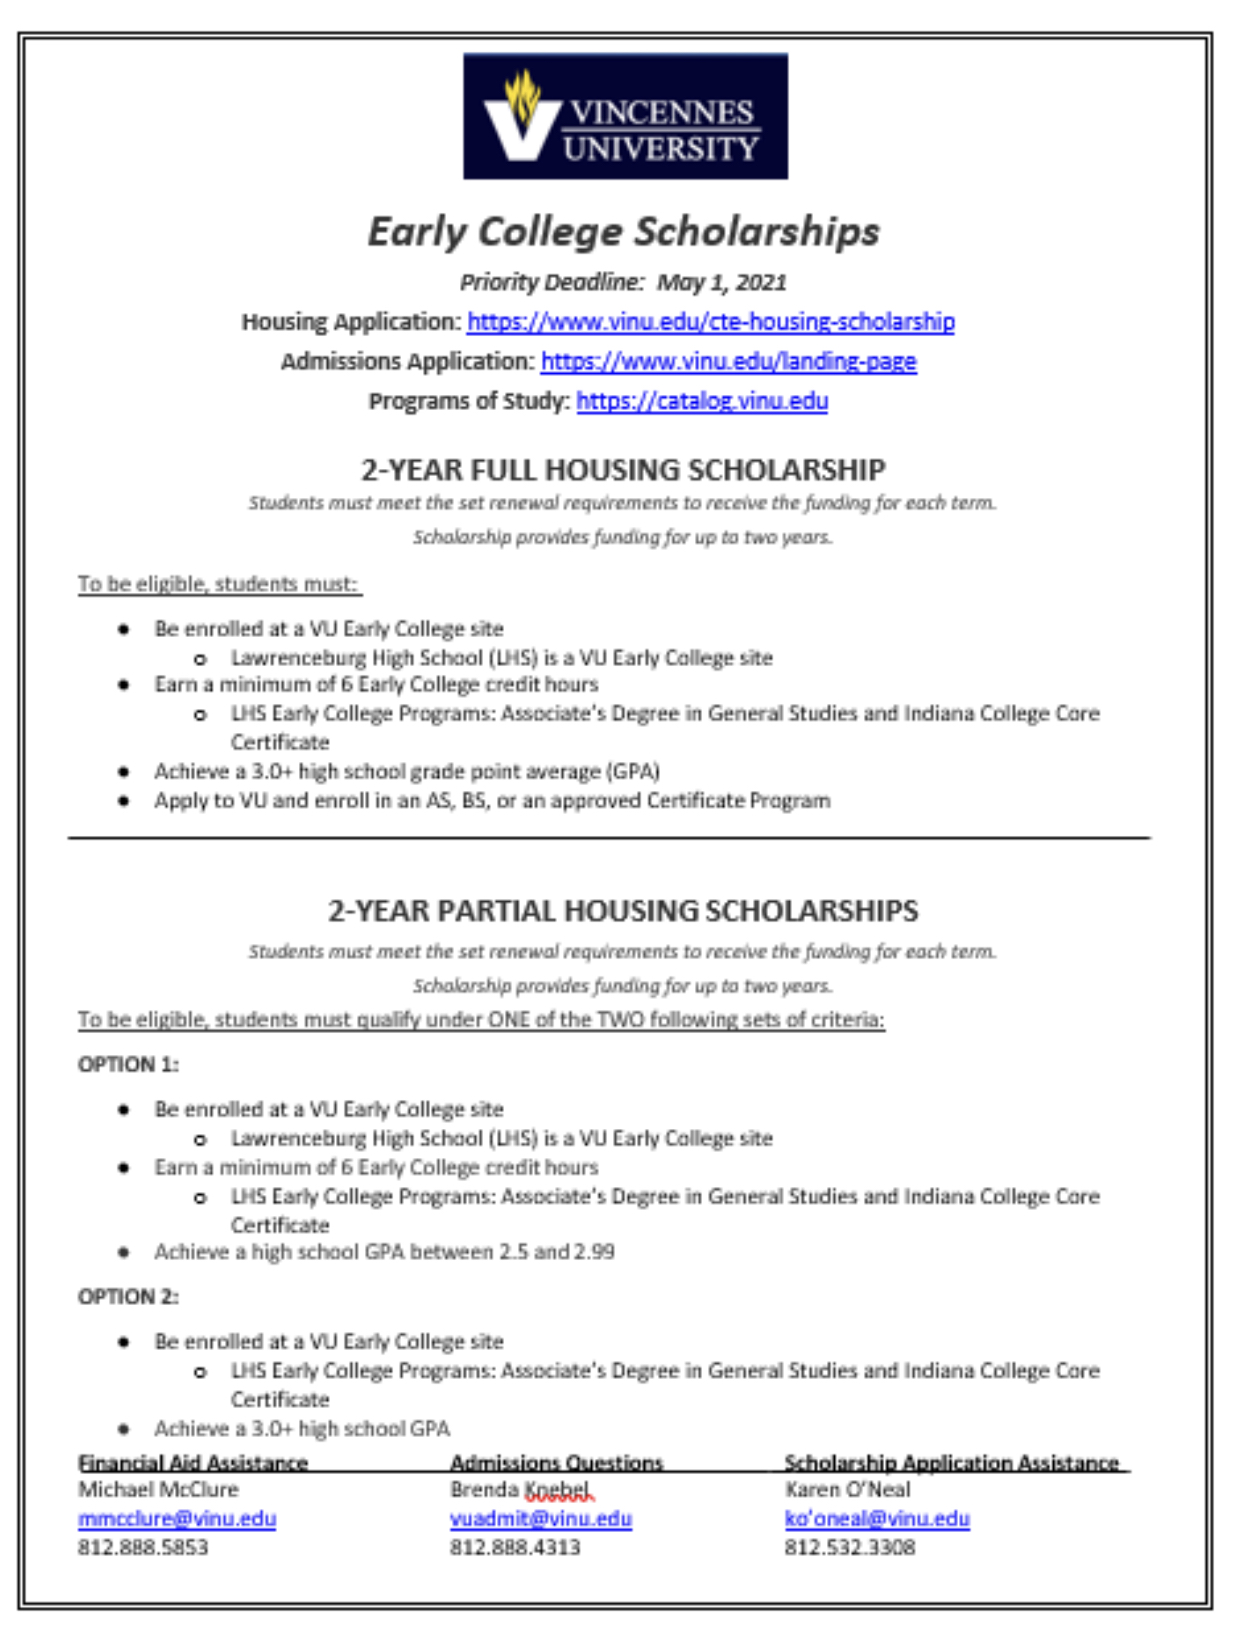 Early Collage Scholarships link